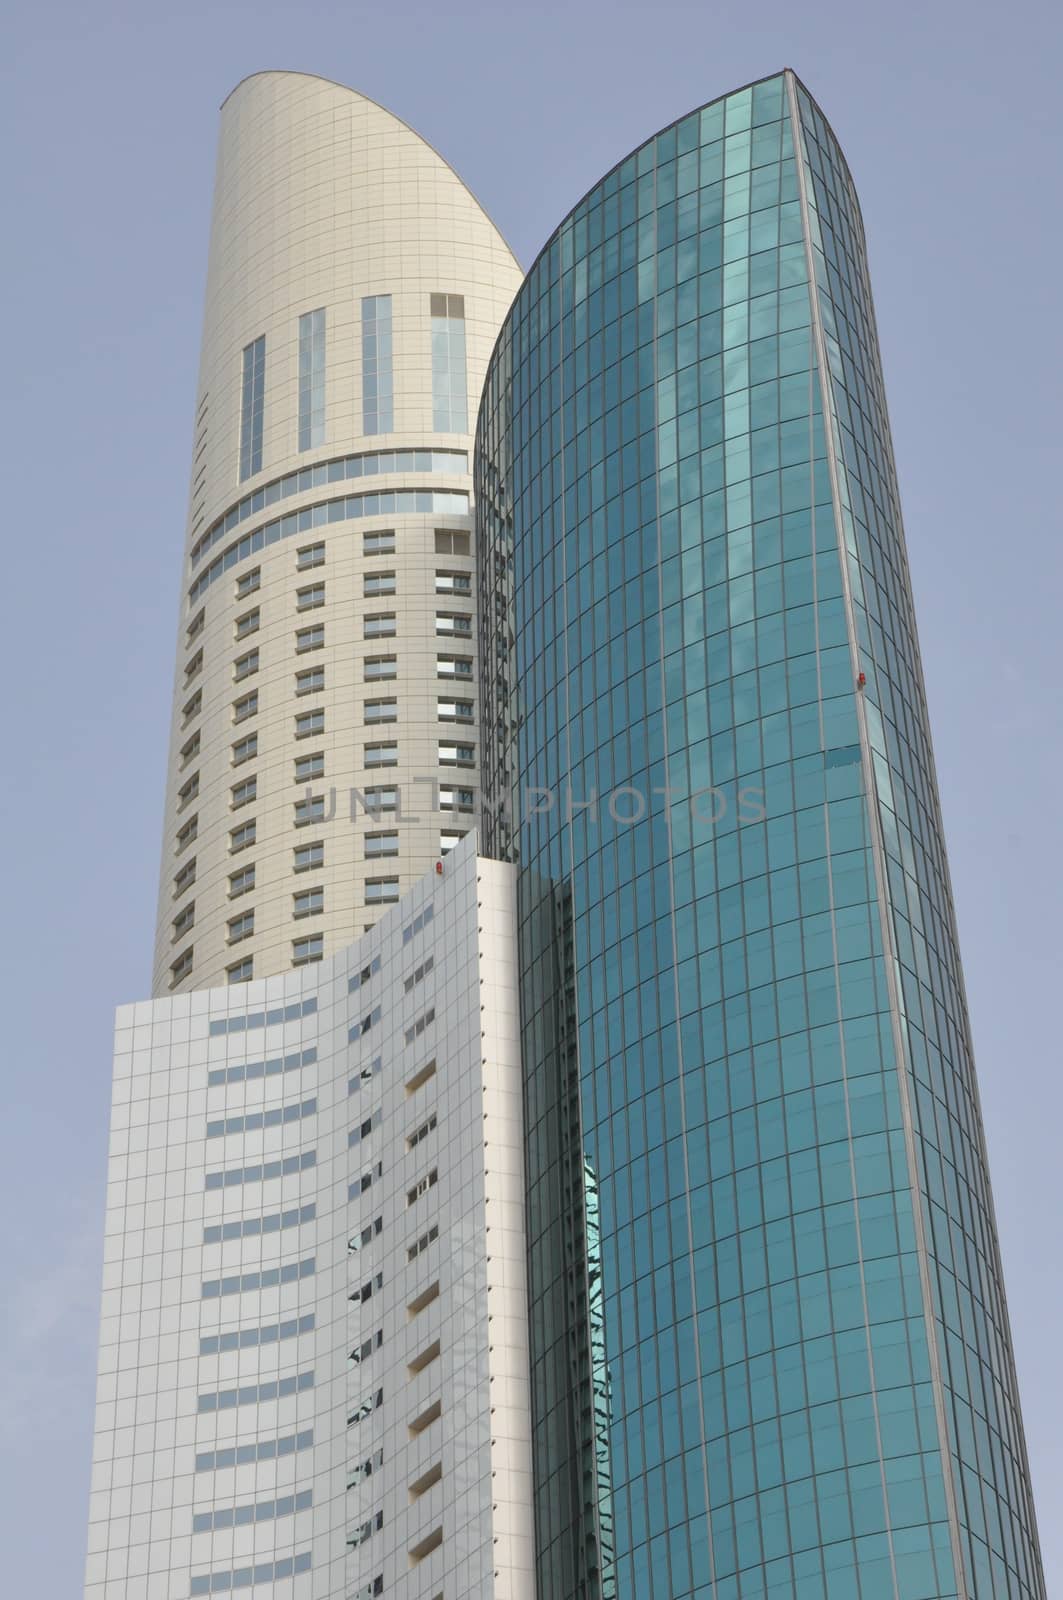 Ascott Park Place in Dubai, UAE. The tower is one of the tallest buildings in Dubai.